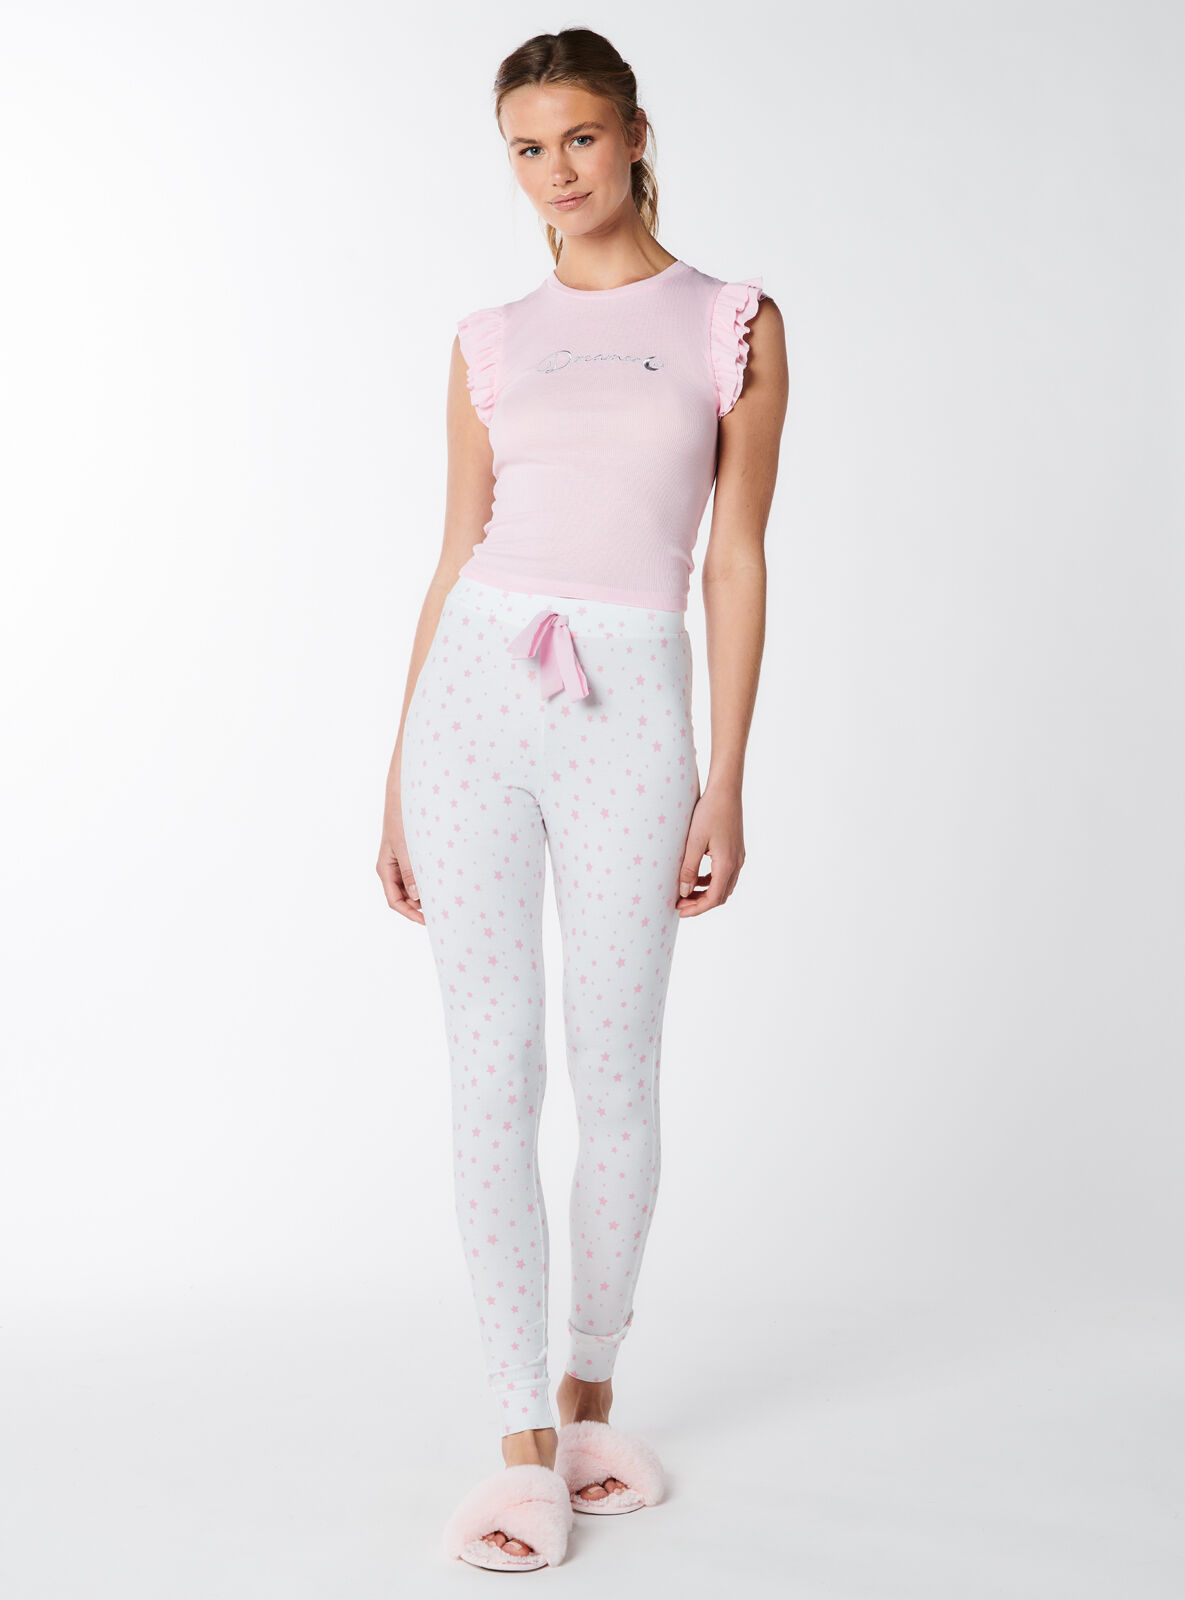 Boux Avenue Dreamer frill tee and leggings set - Pink Mix - 18